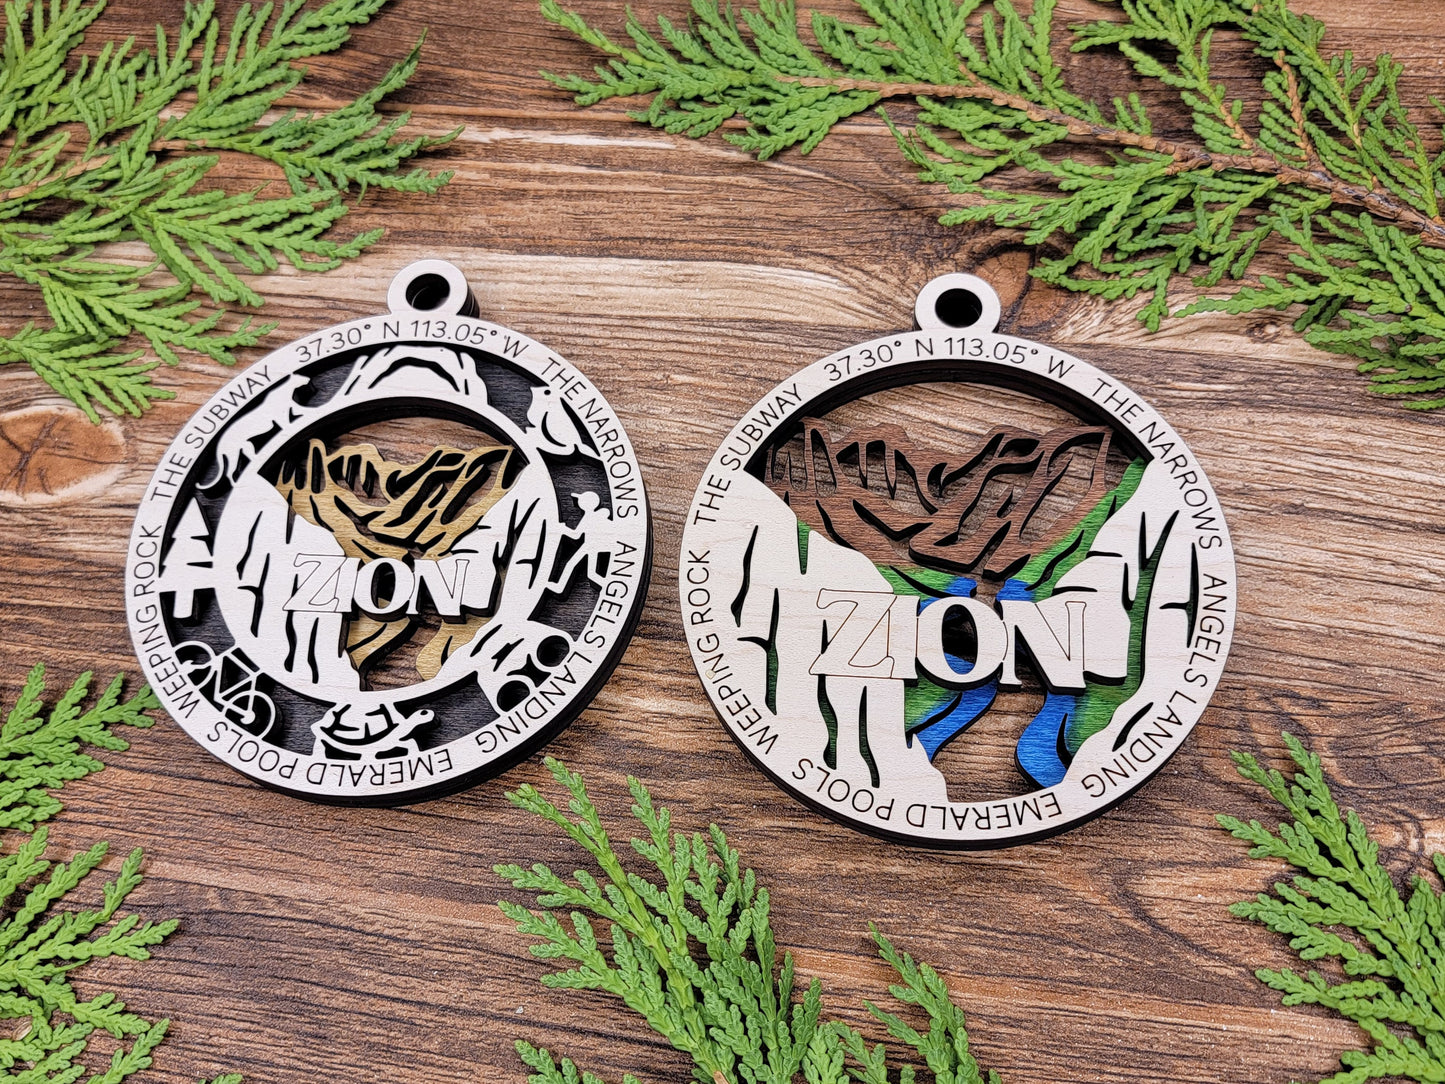 Zion Park Ornament - Includes 2 Ornaments - Laser Design SVG, PDF, AI File Download - Tested On Glowforge and LightBurn